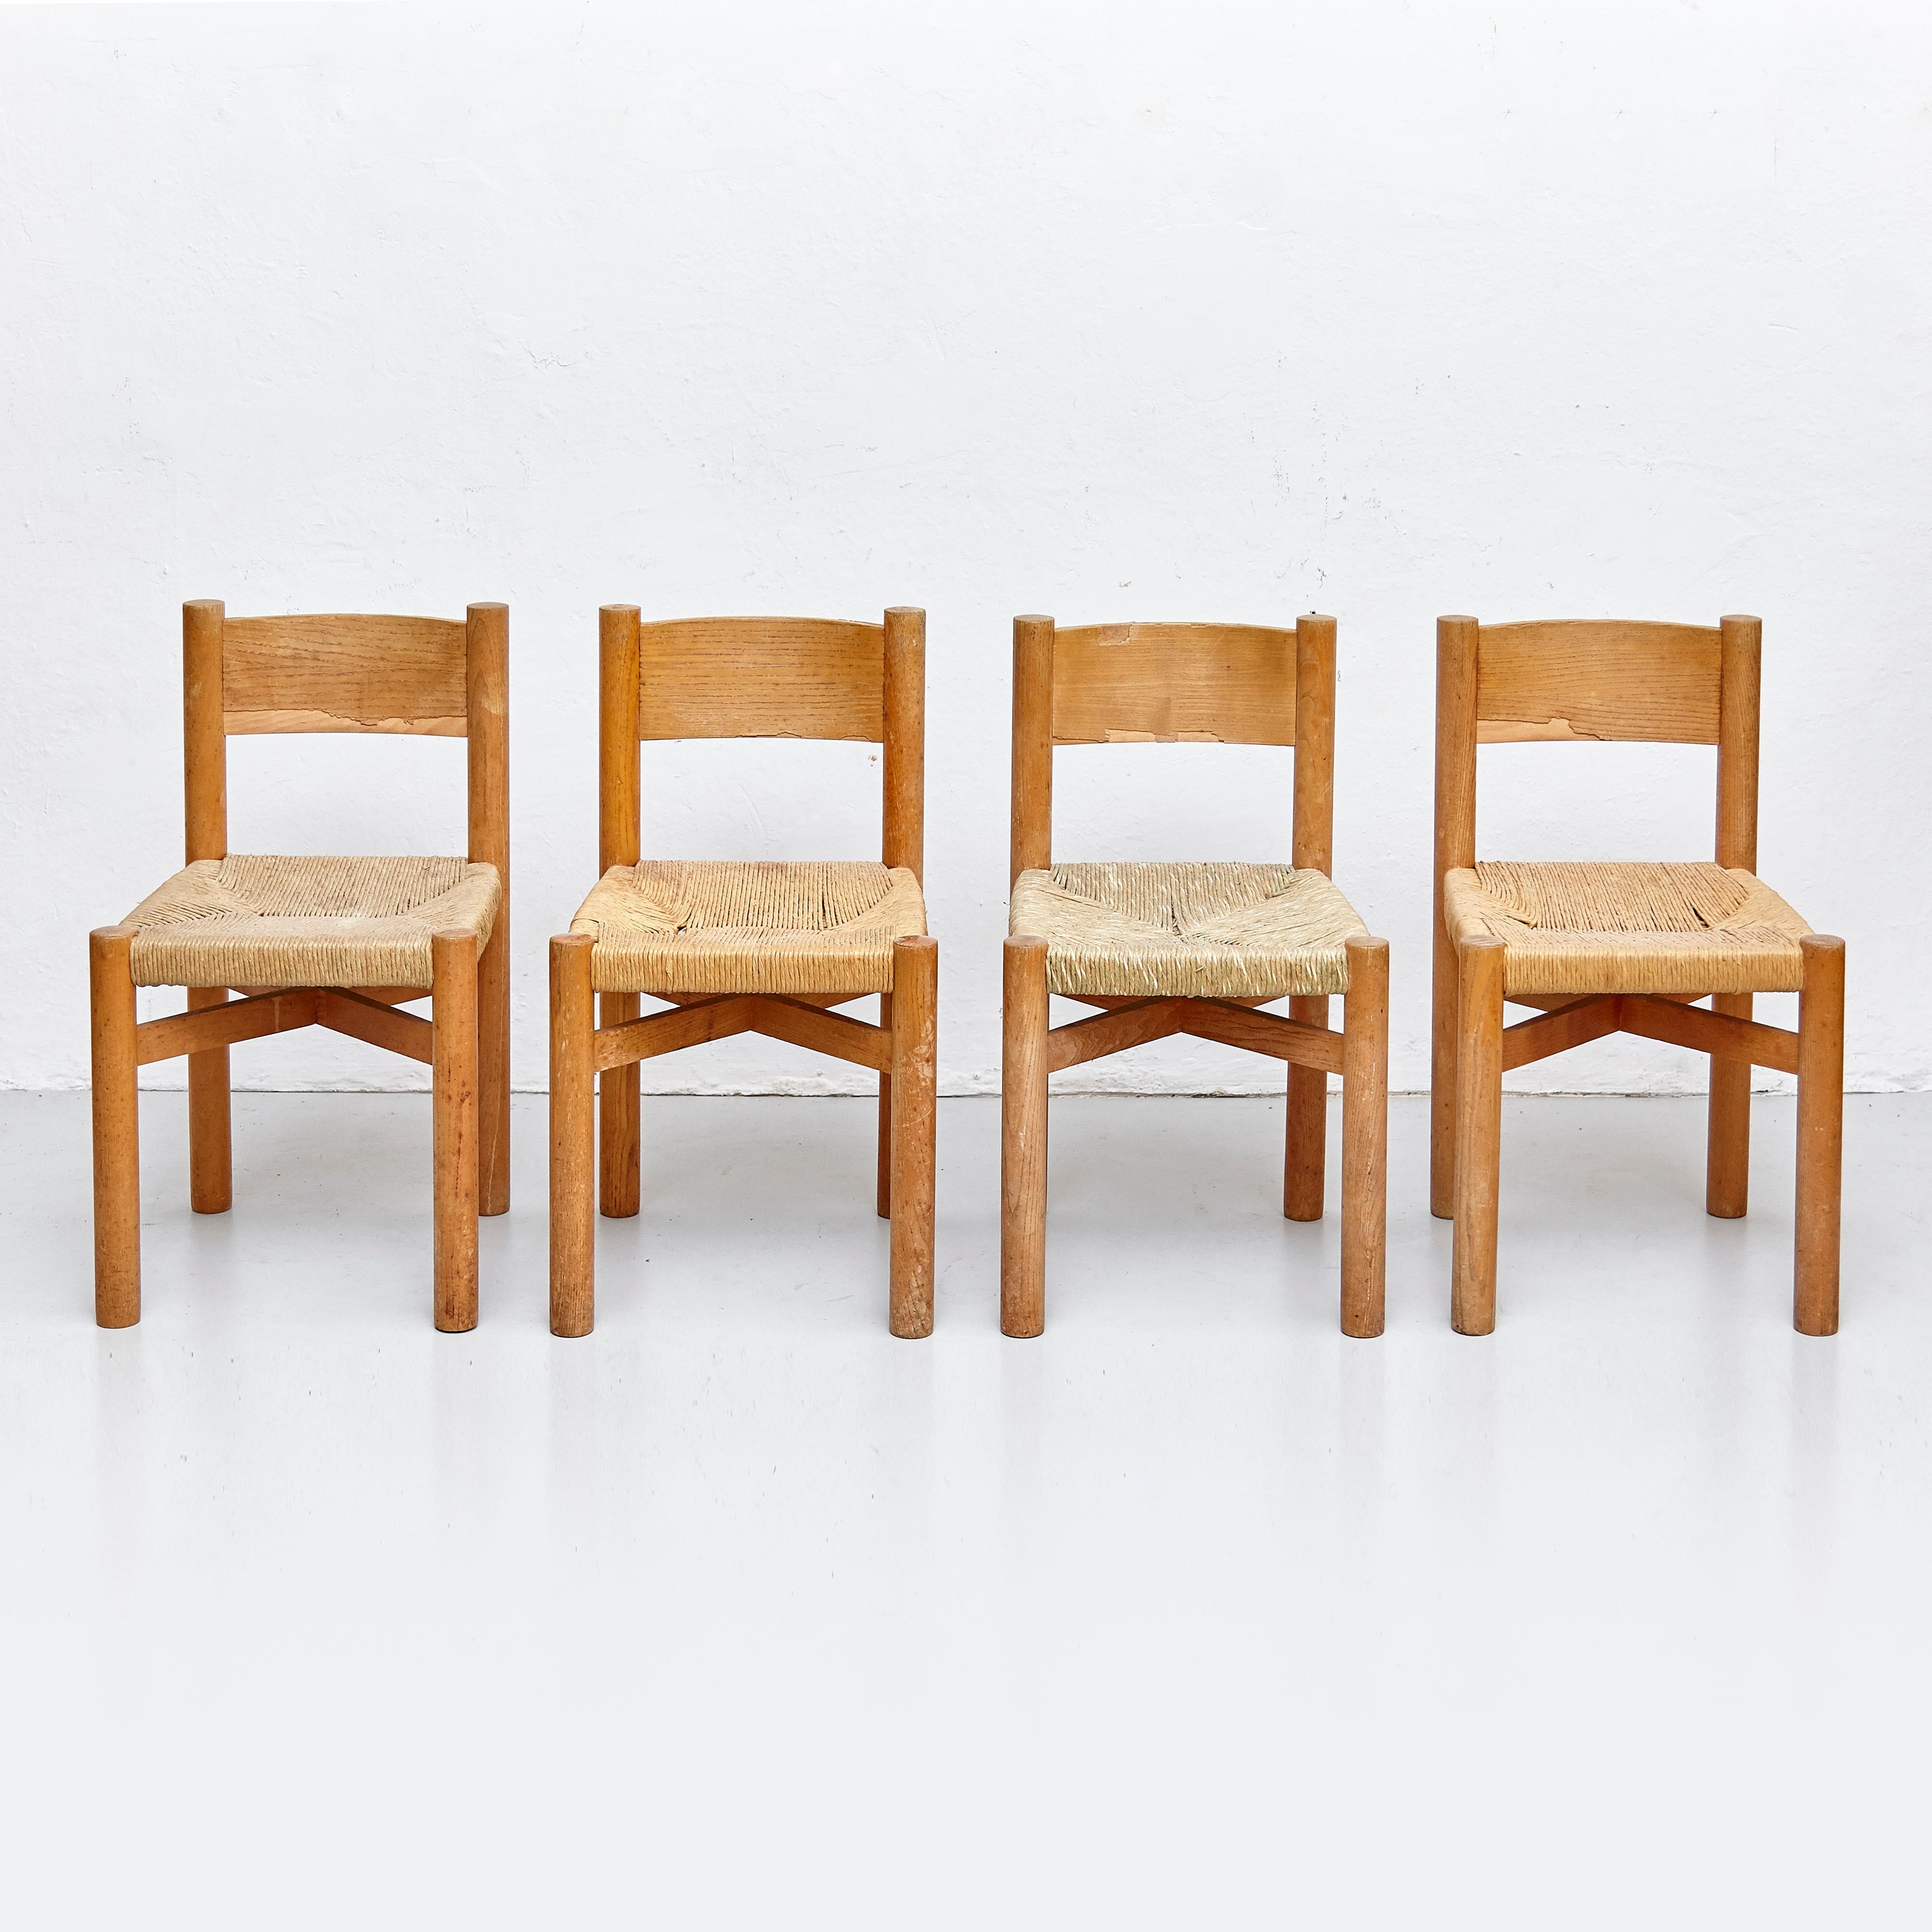 Chair model meribel, designed by Charlotte Perriand, circa 1950, manufactured in France.

Wood and rattan.

In original condition, with minor wear consistent with age 
and use, preserving a beautiful patina.

Charlotte Perriand (1903-1999)